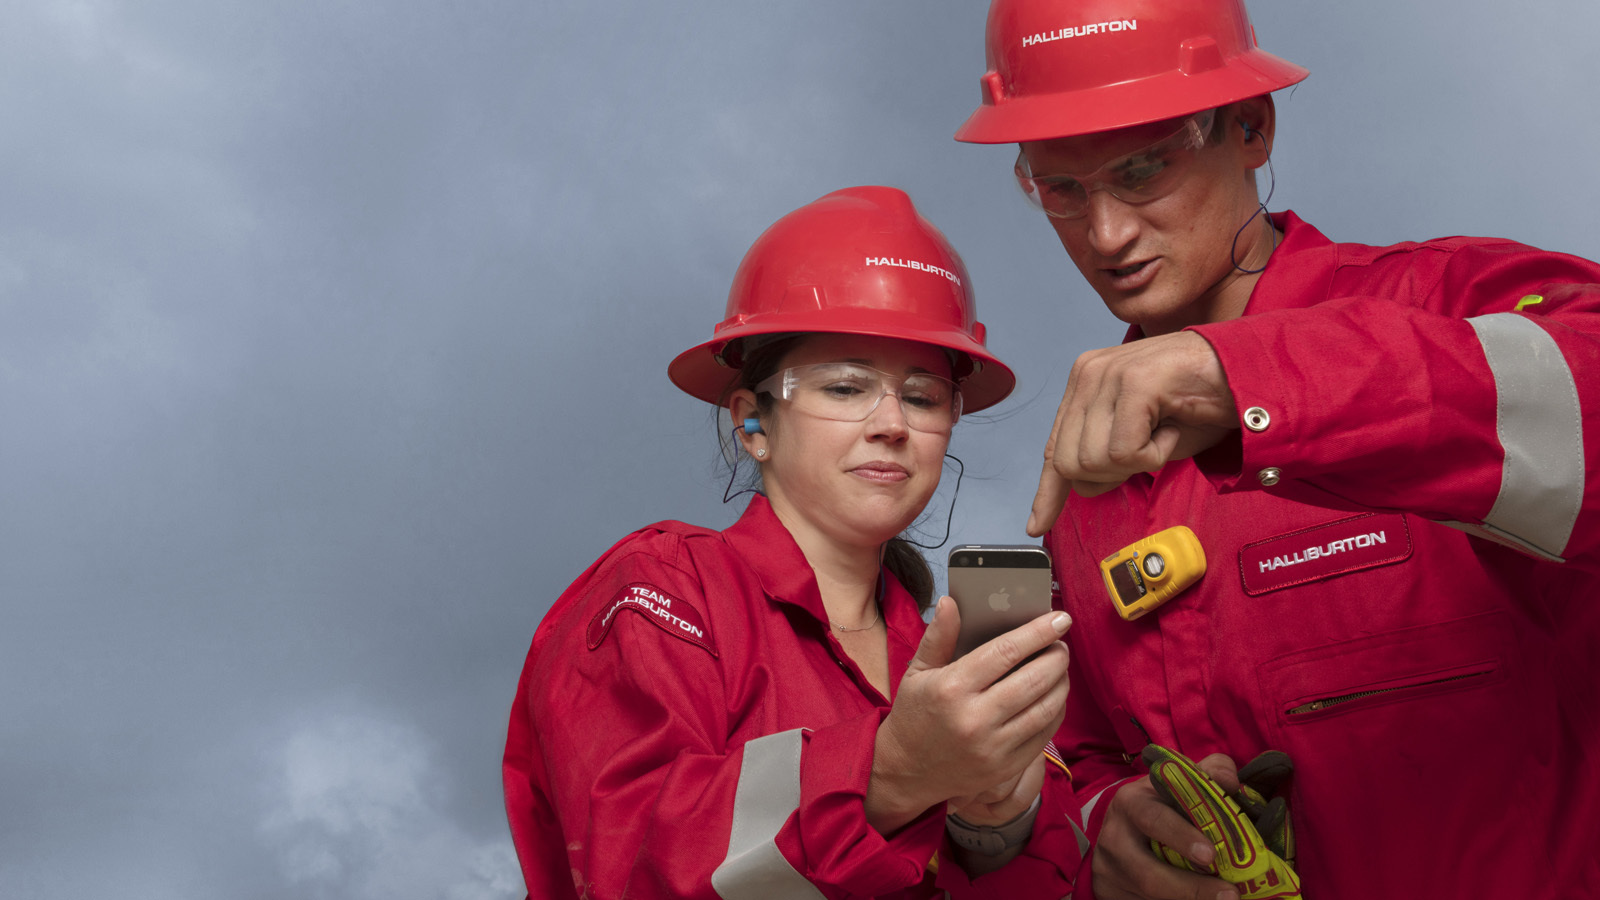 Two halliburton engineers looking at a phone